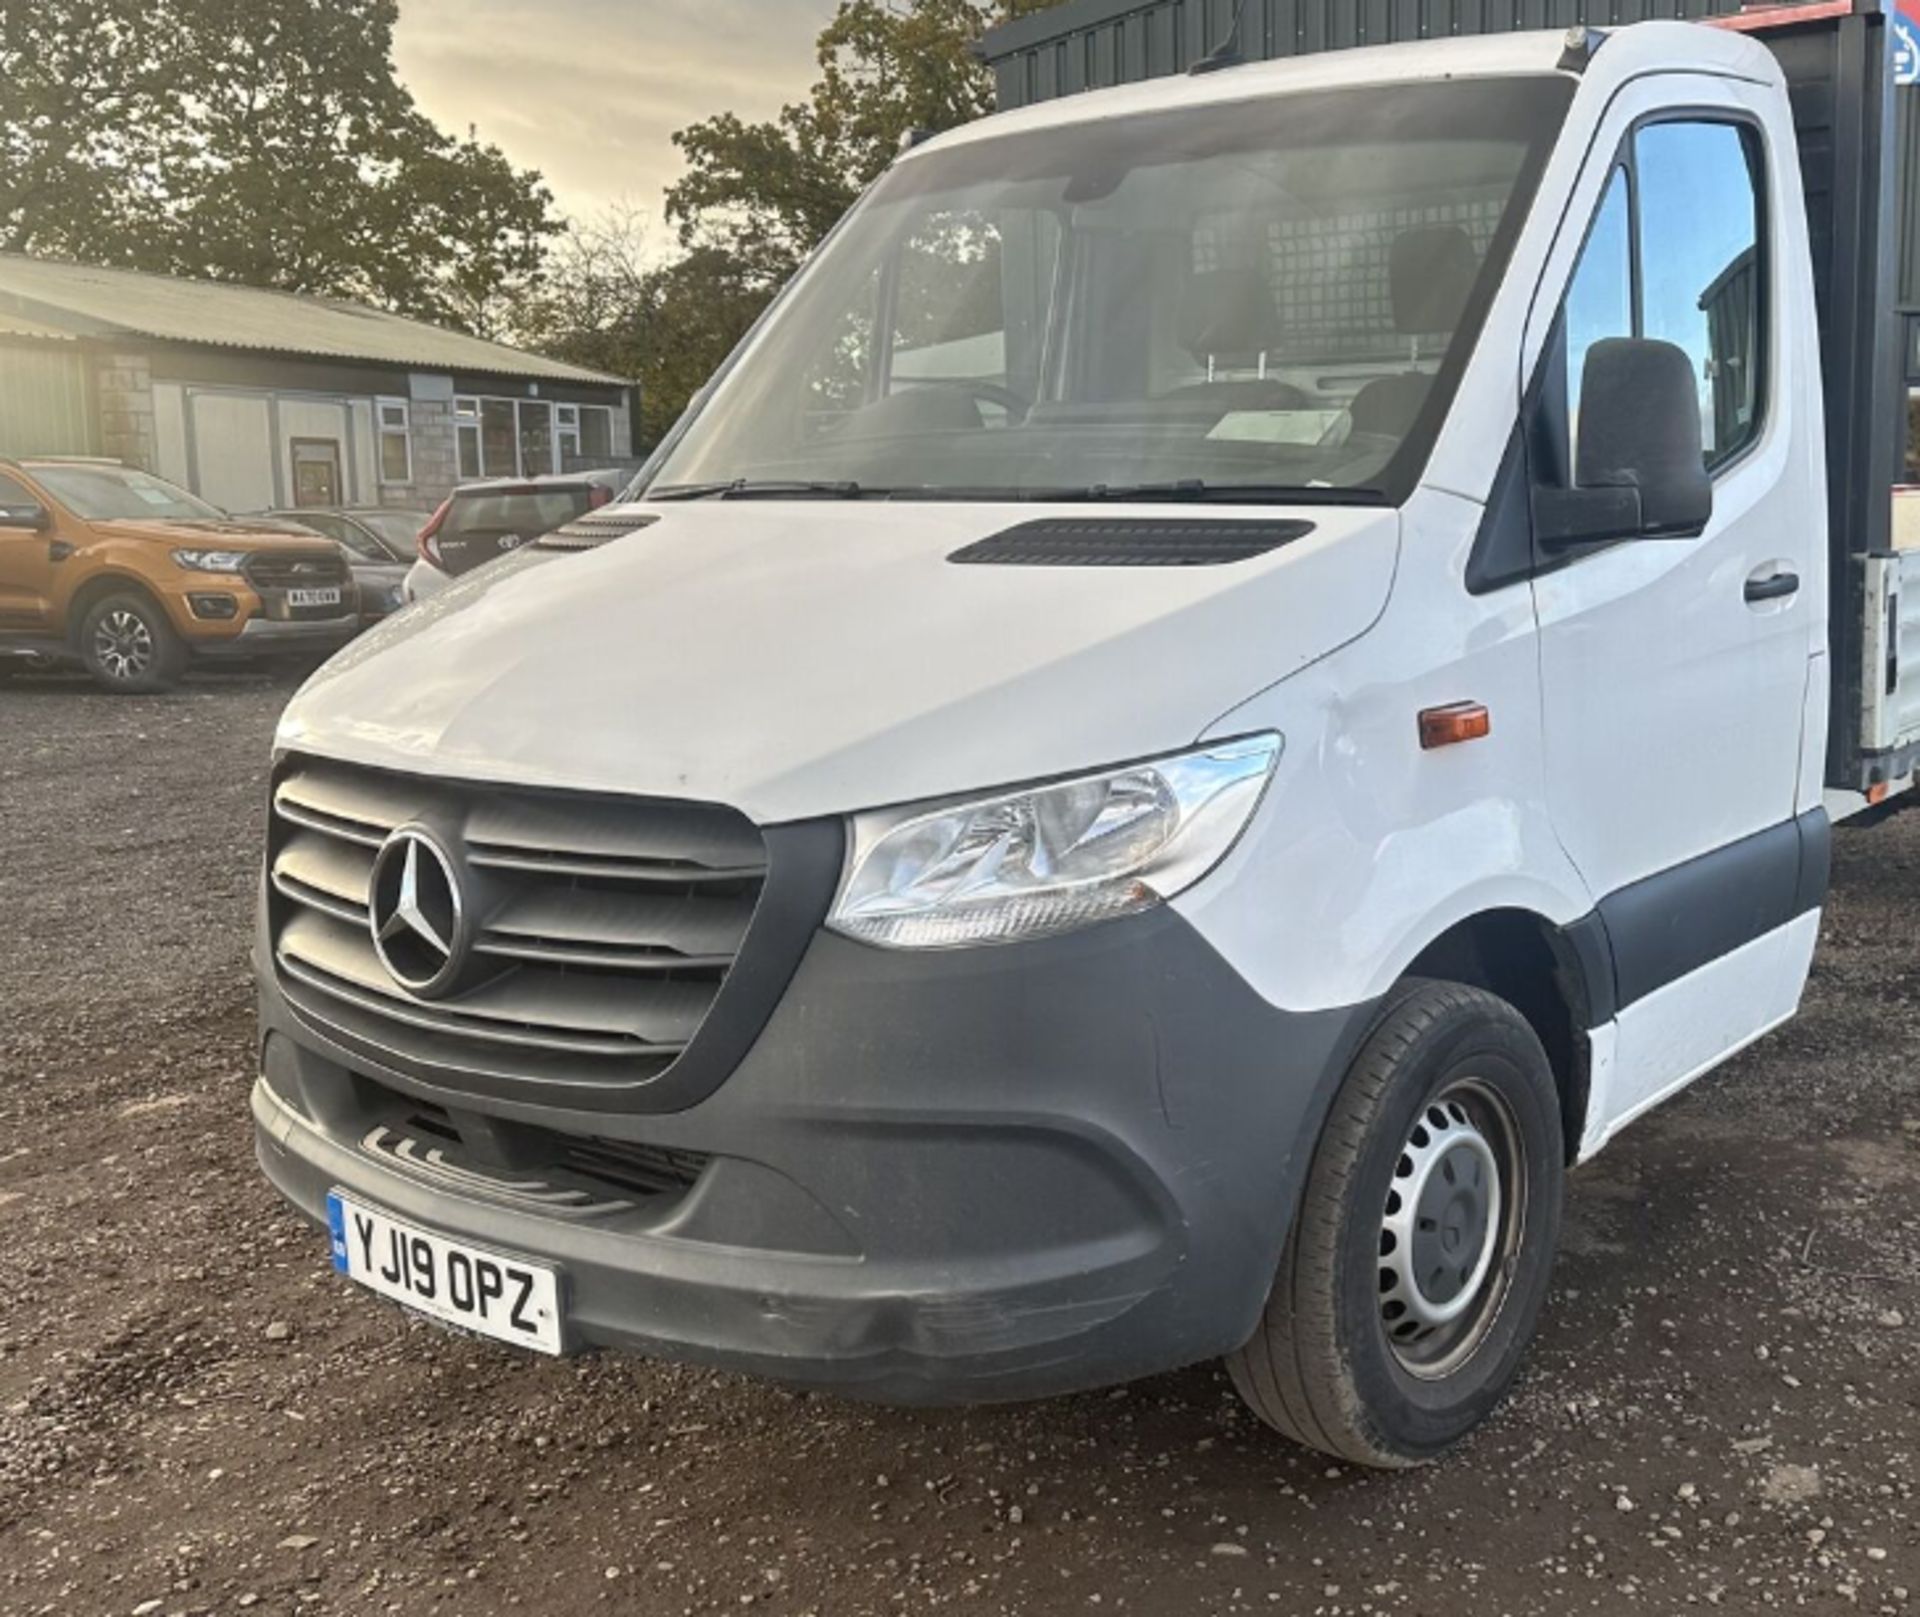 105K MILES - 2019 MERCEDES SPRINTER 314: LOW MILEAGE RECOVERY - MOT MARCH 2024